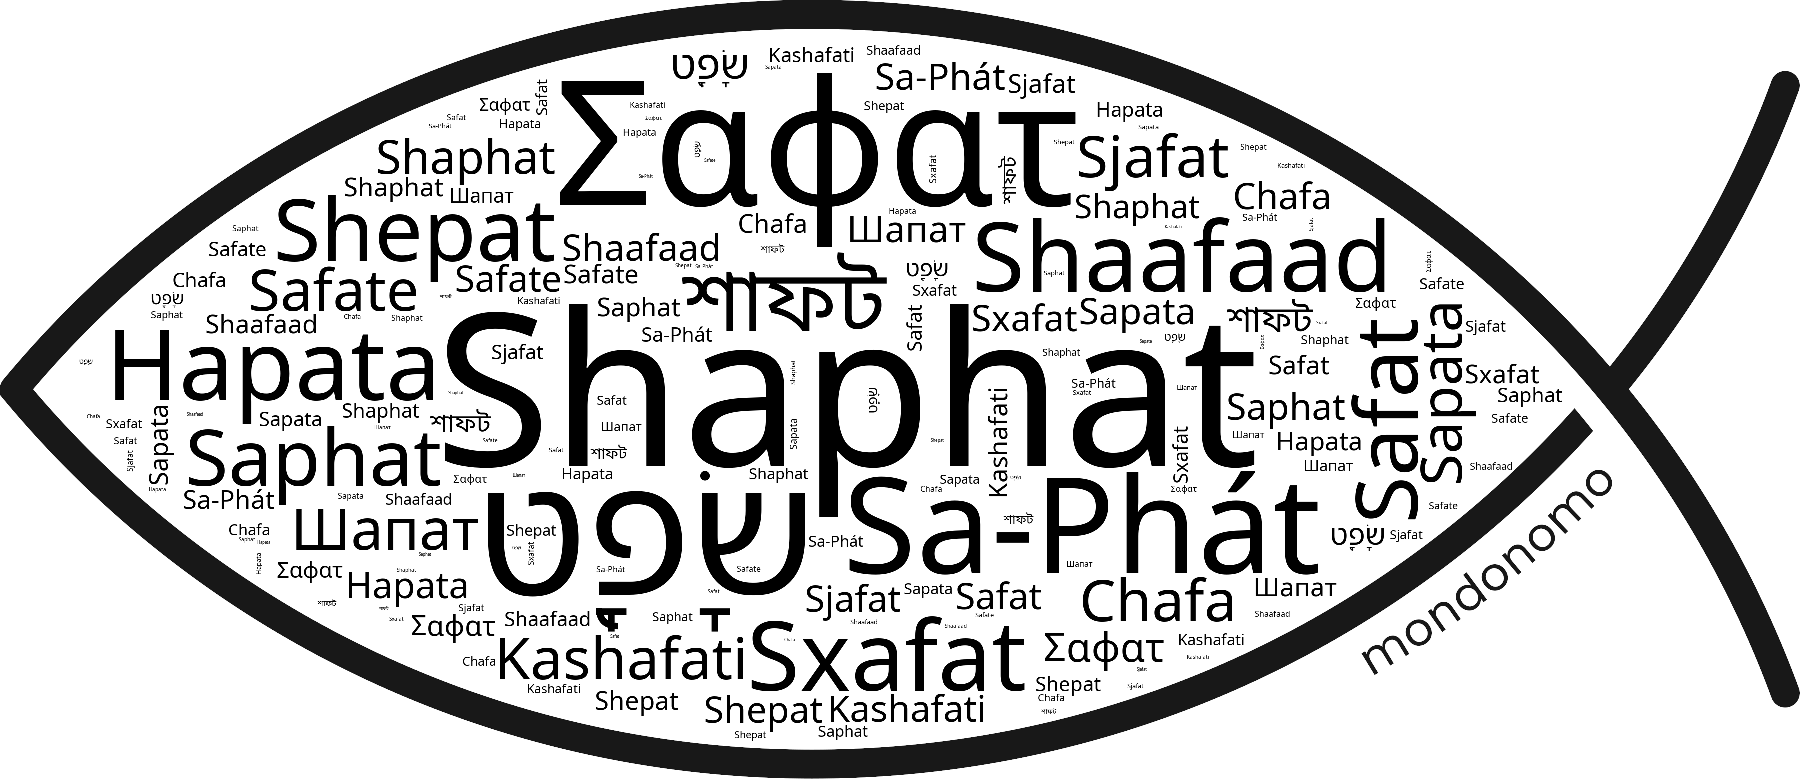 Name Shaphat in the world's Bibles